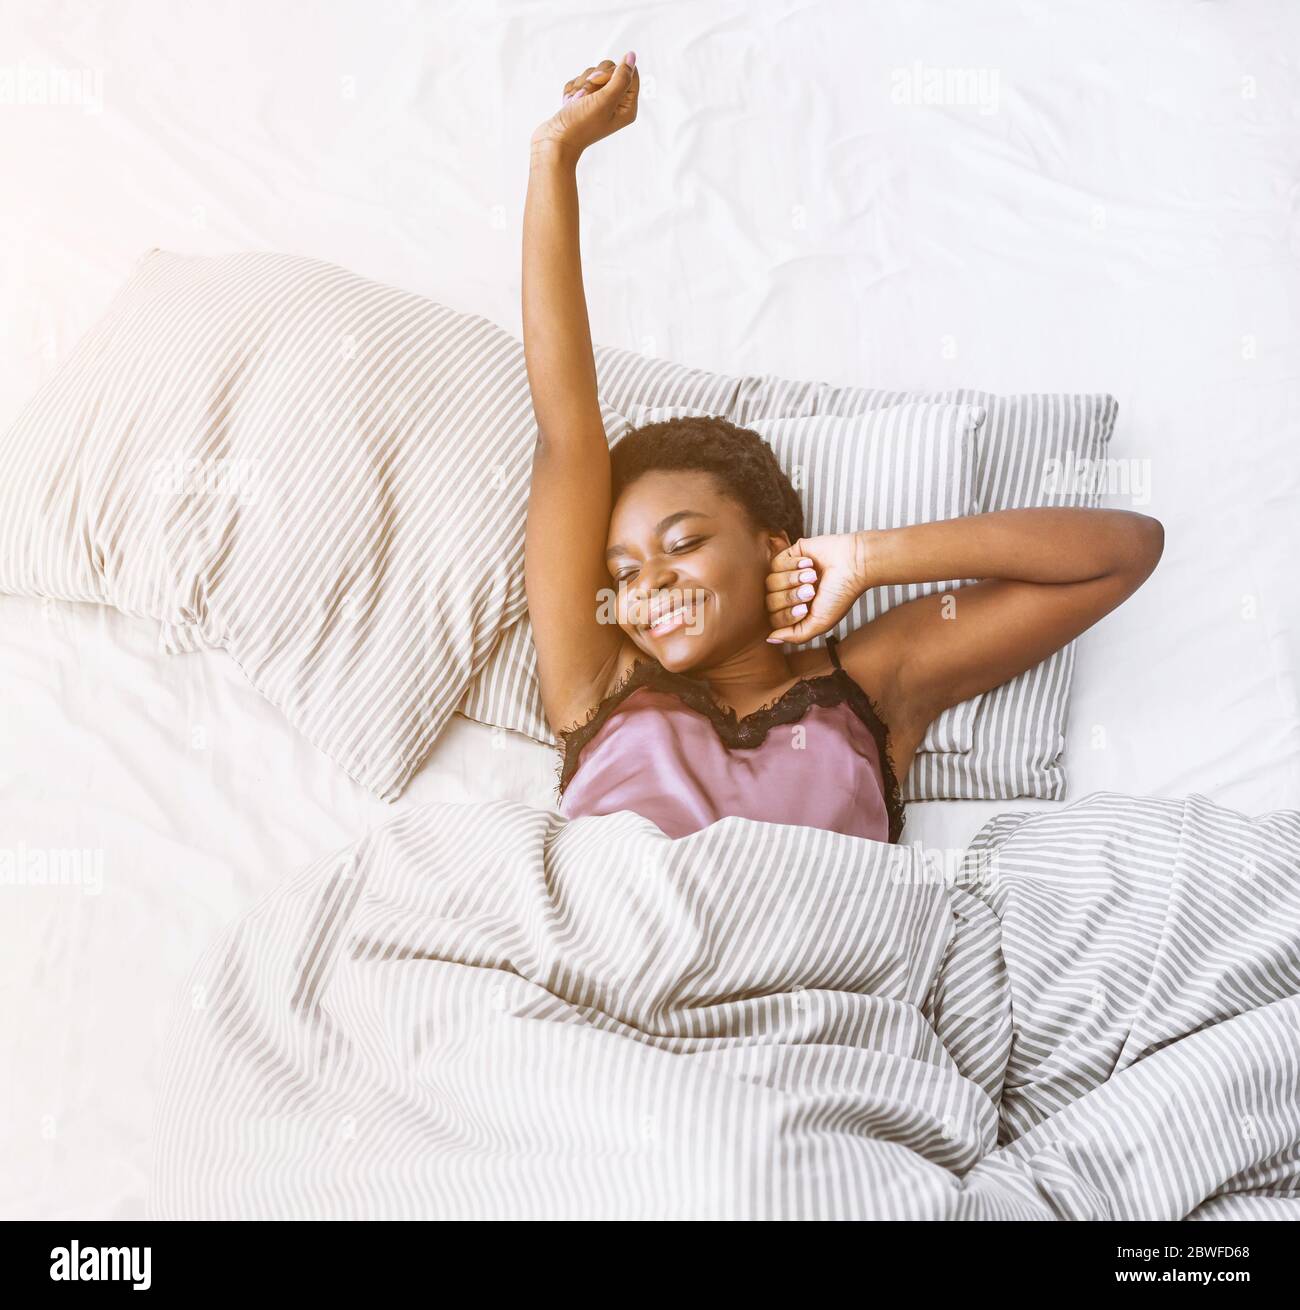 Start of sunny day. Smiling african american girl stretching in bed Stock Photo